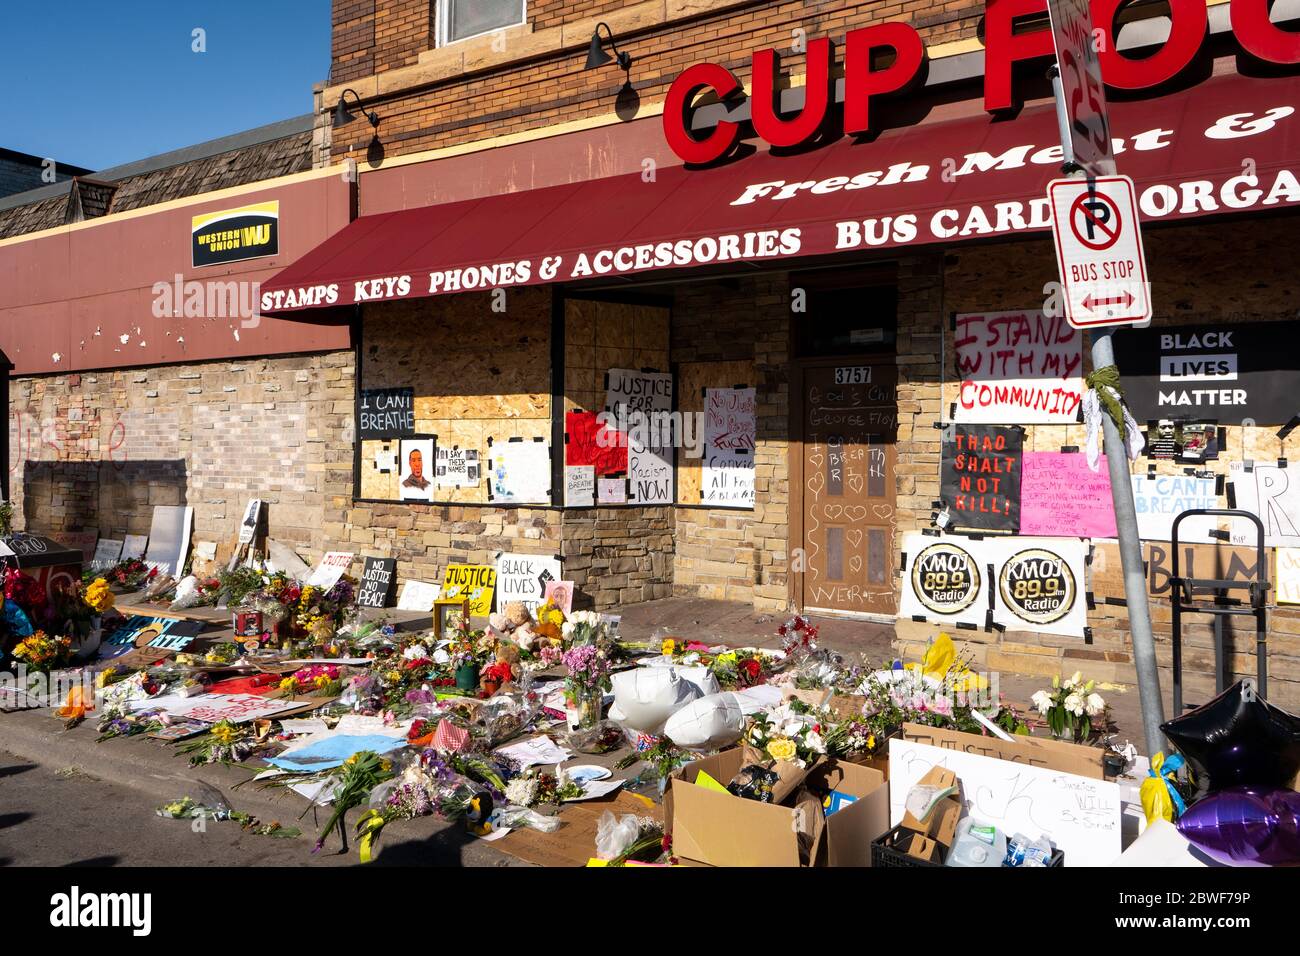 George Floyd memorial at Cup Foods in Minneapolis, MN, on May 29, 2020. Protests against police brutality continued across the country this weekend over the death of George Floyd, whose death while in police custody was captured on video. (Photo by munshots/Sipa USA) Stock Photo